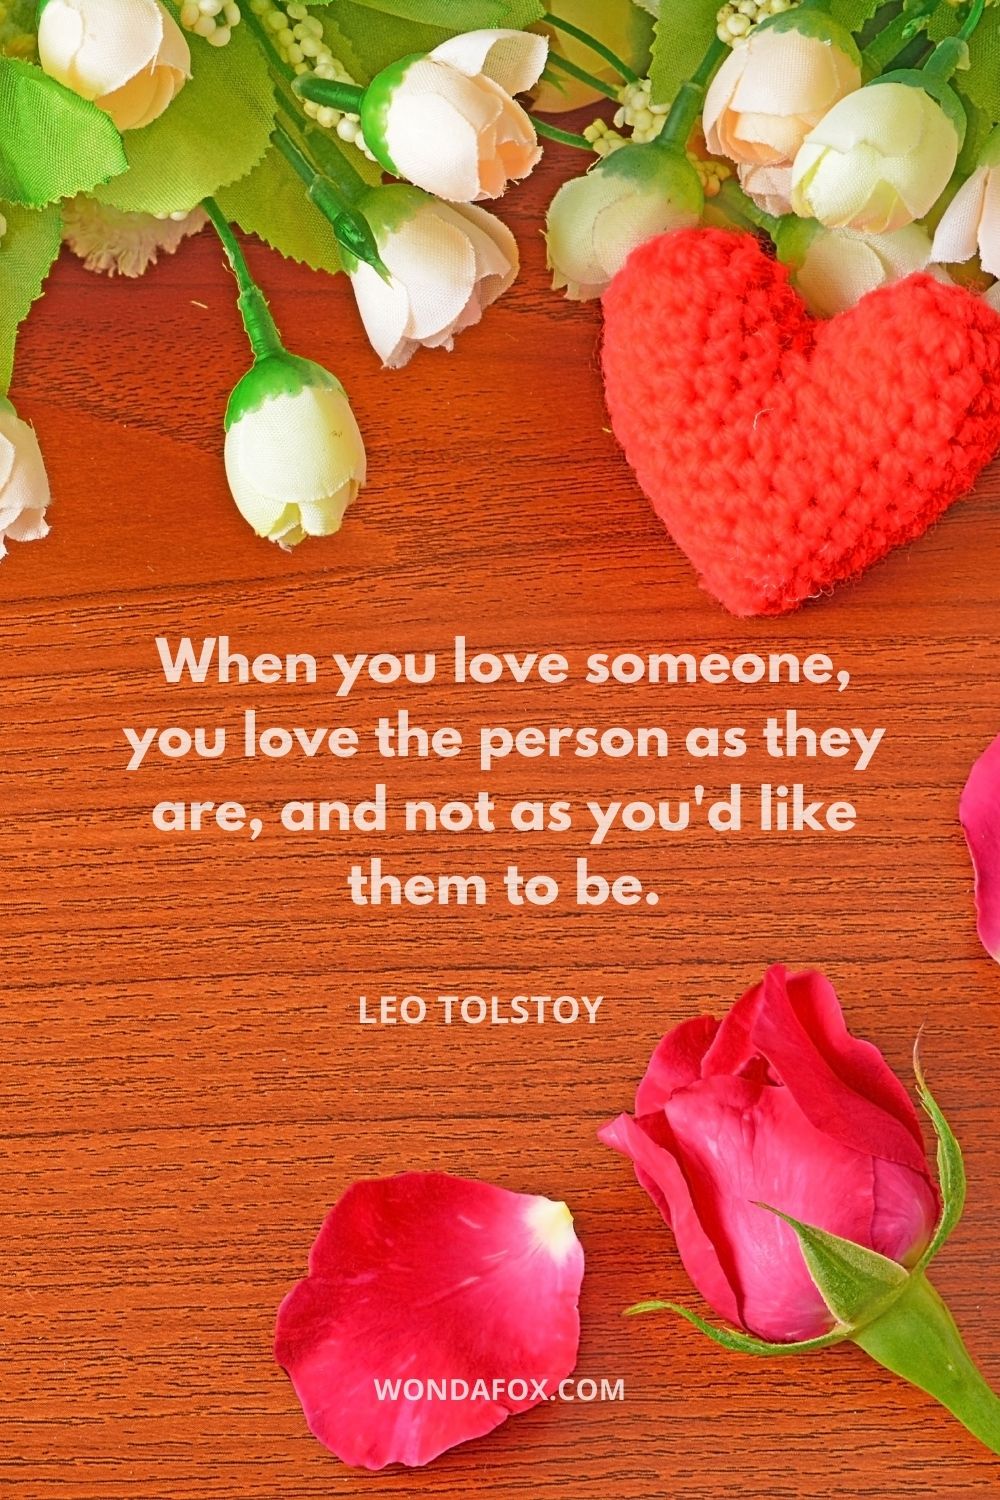 When you love someone, you love the person as they are, and not as you'd like them to be.